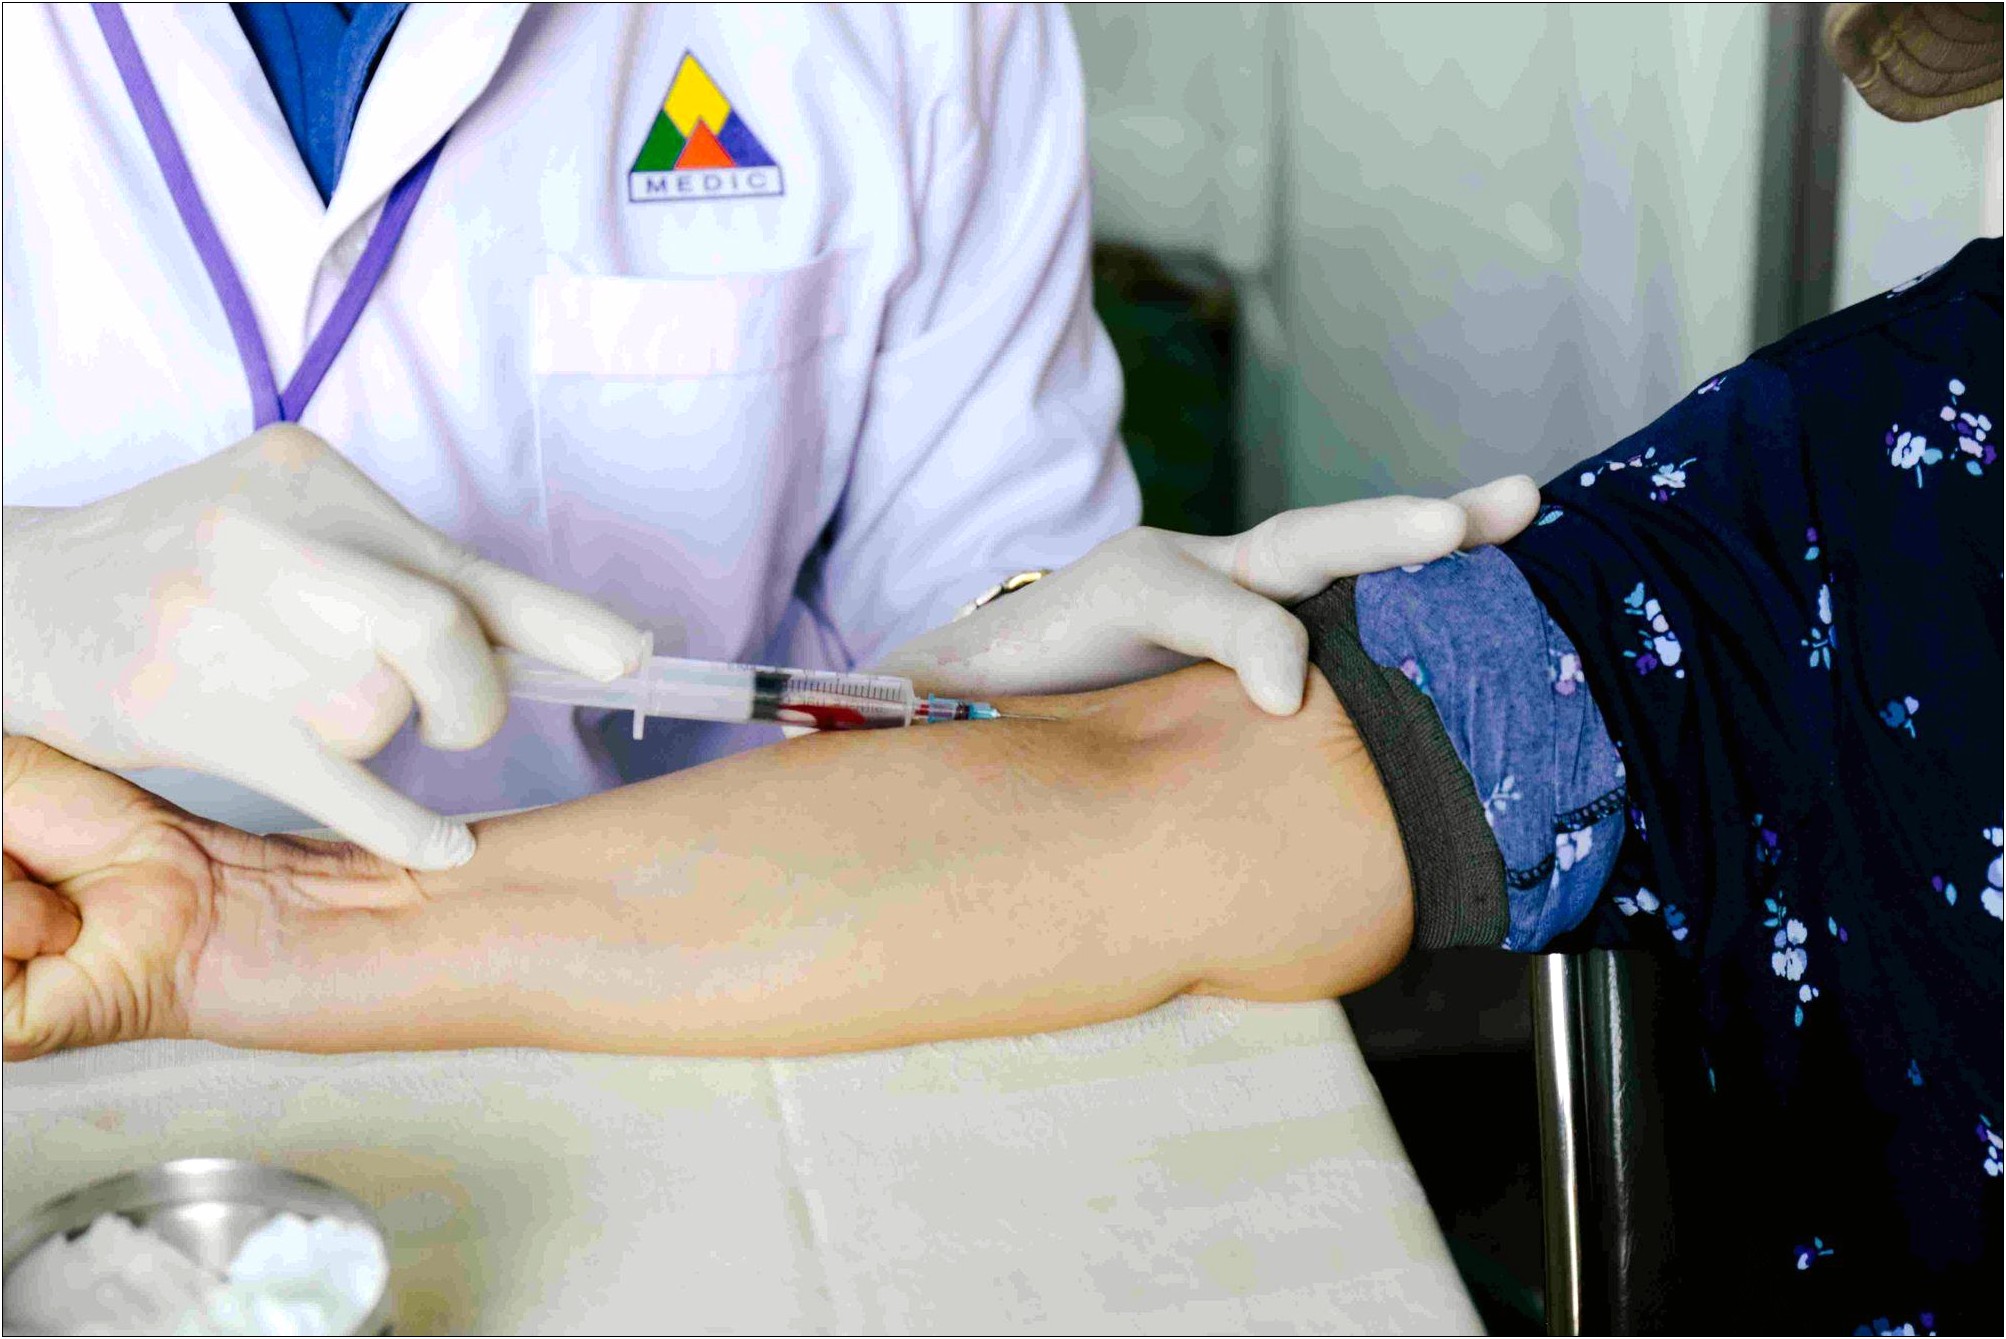 Objectives For Resumes For Phlebotomist